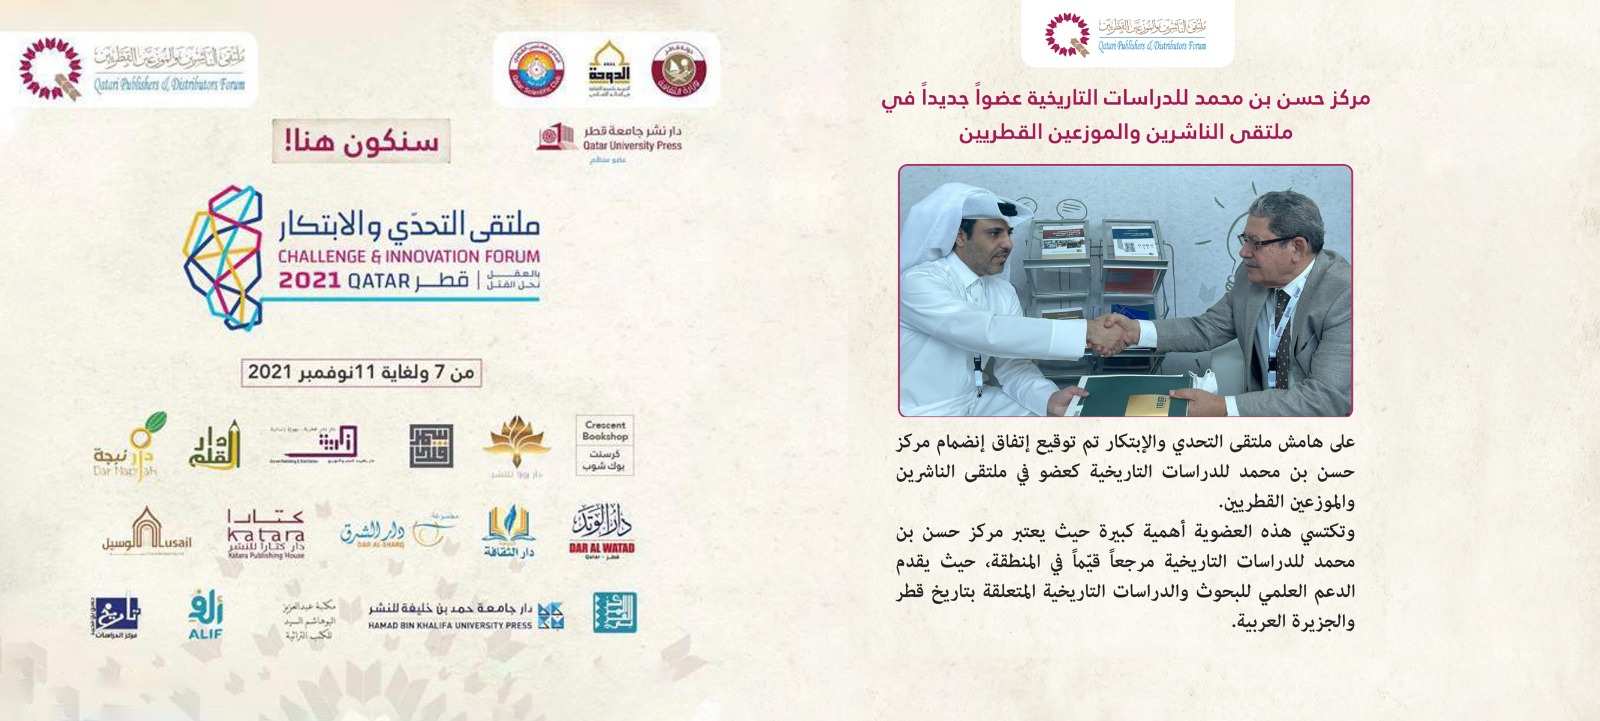 The Center is a Member of Qatari Publishers and Distributors Forum